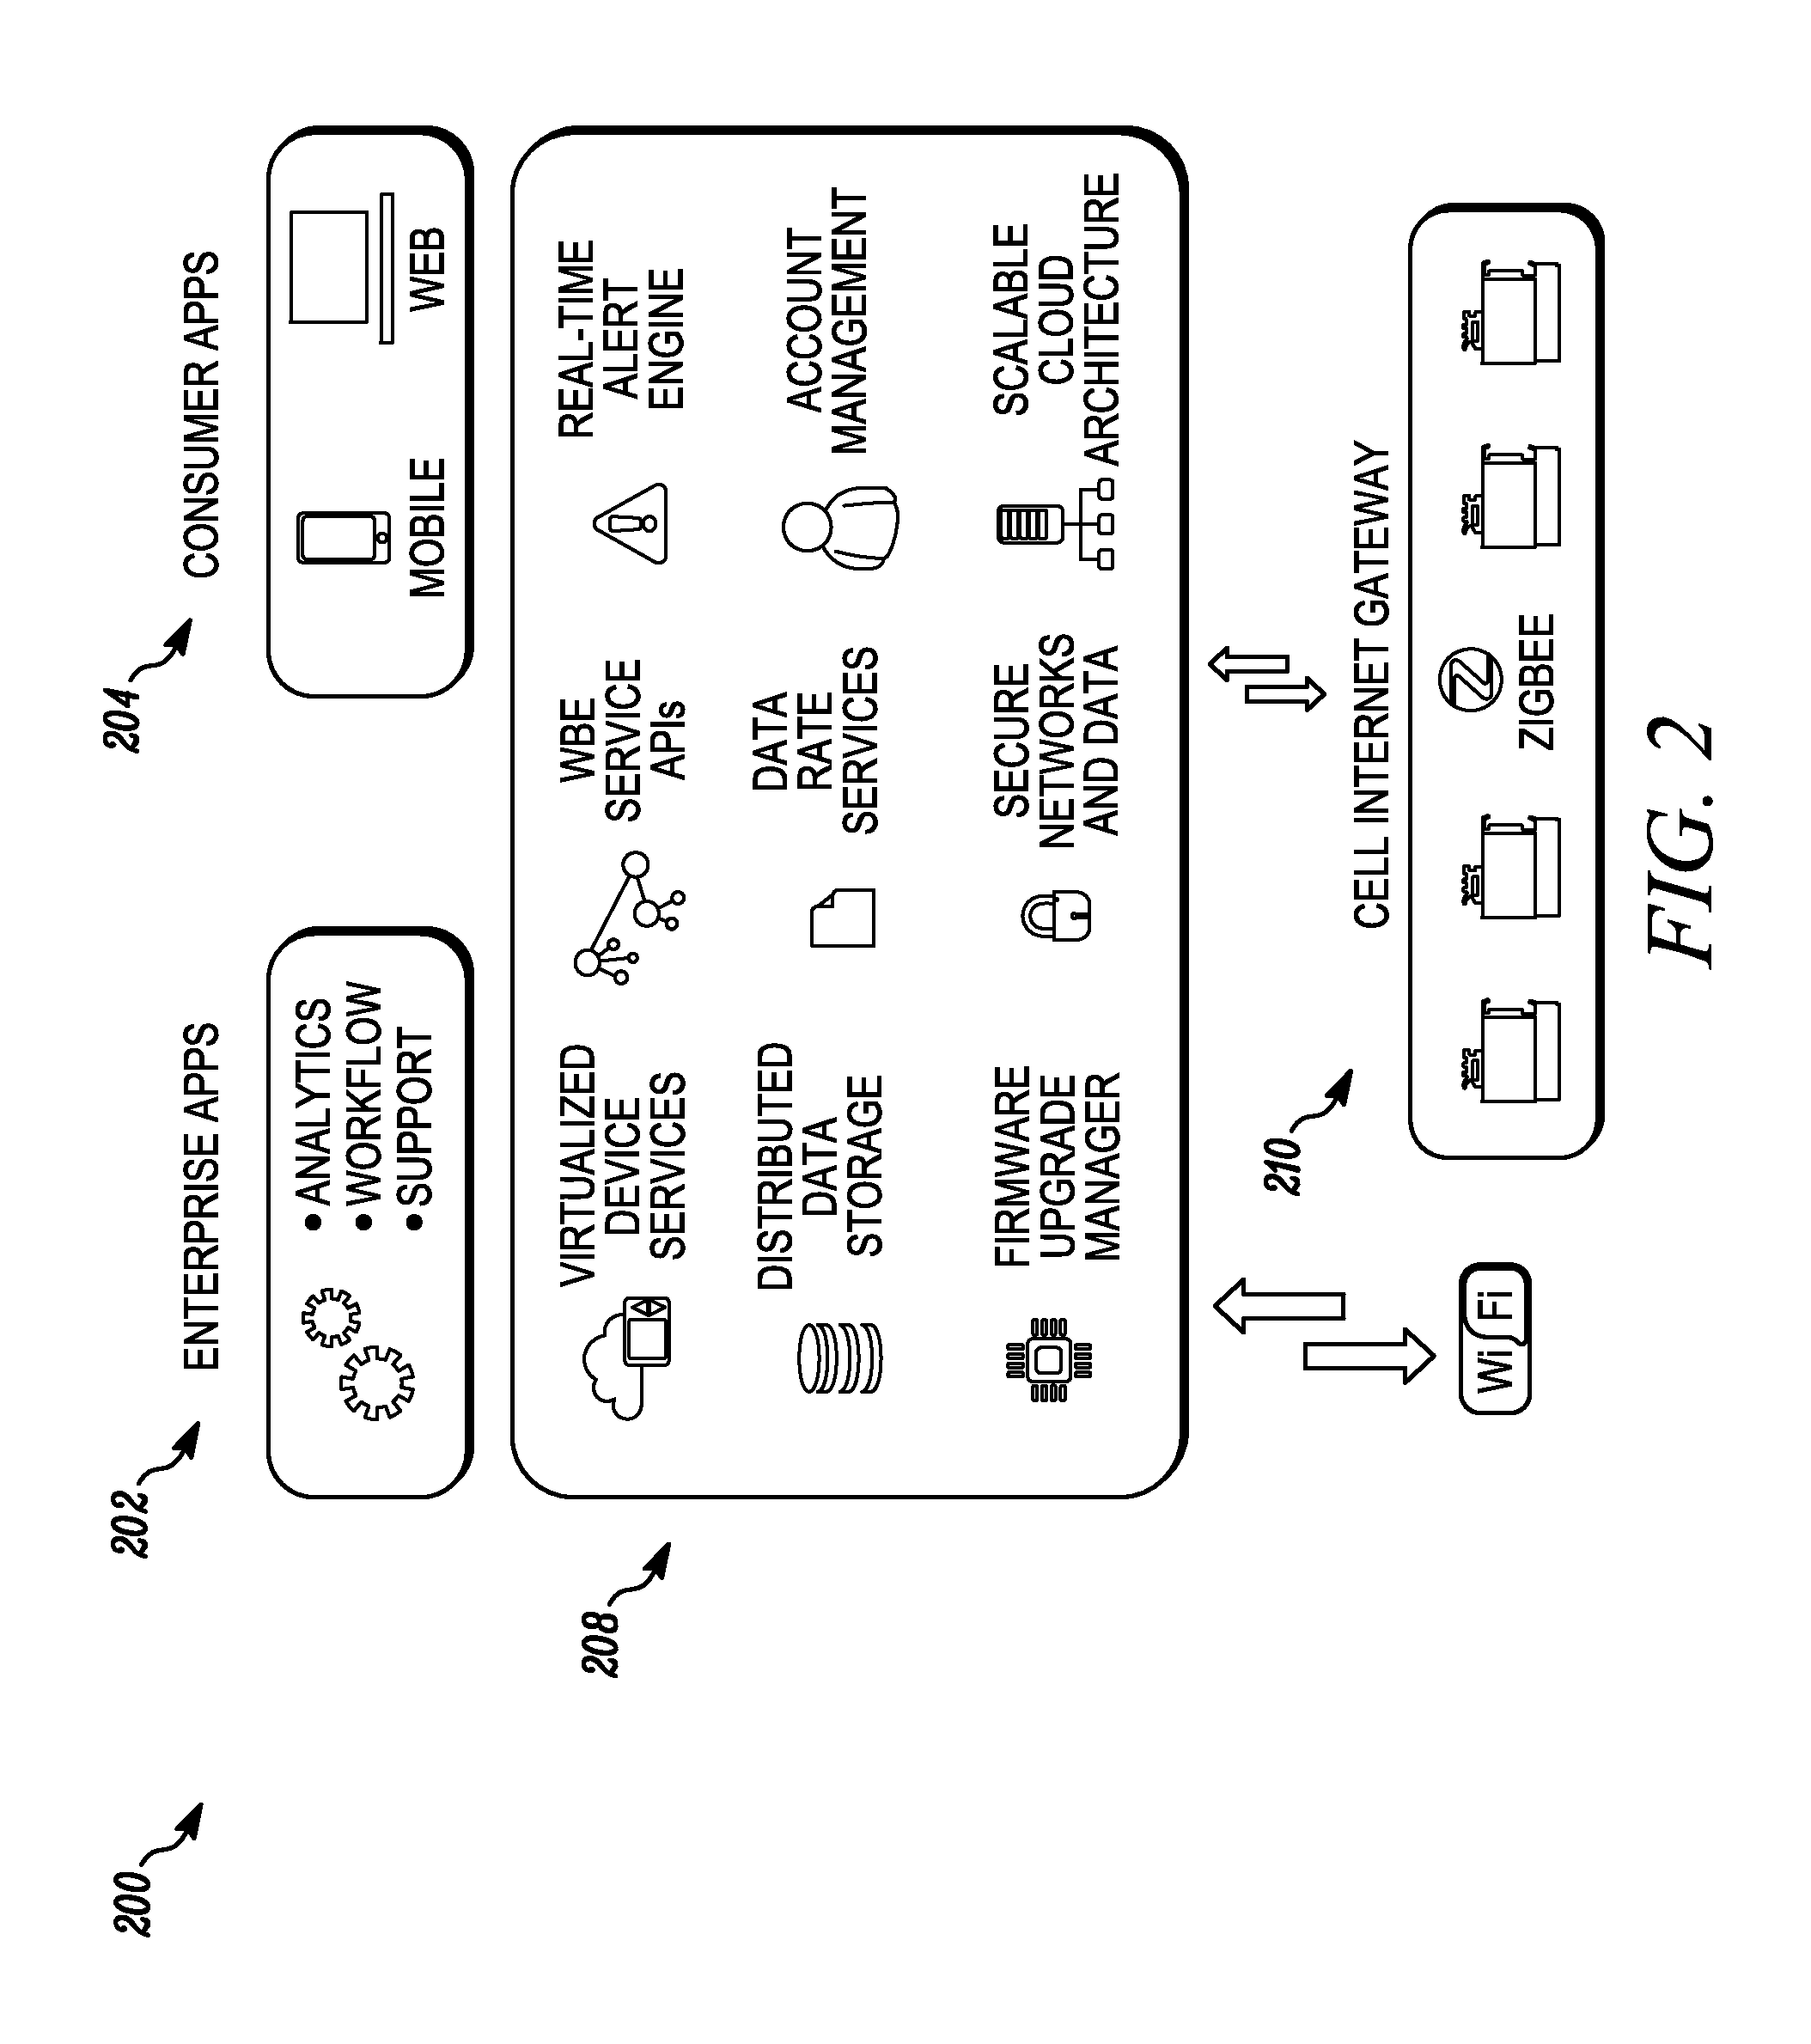 Method and system of a network of diffusers including a liquid level sensor